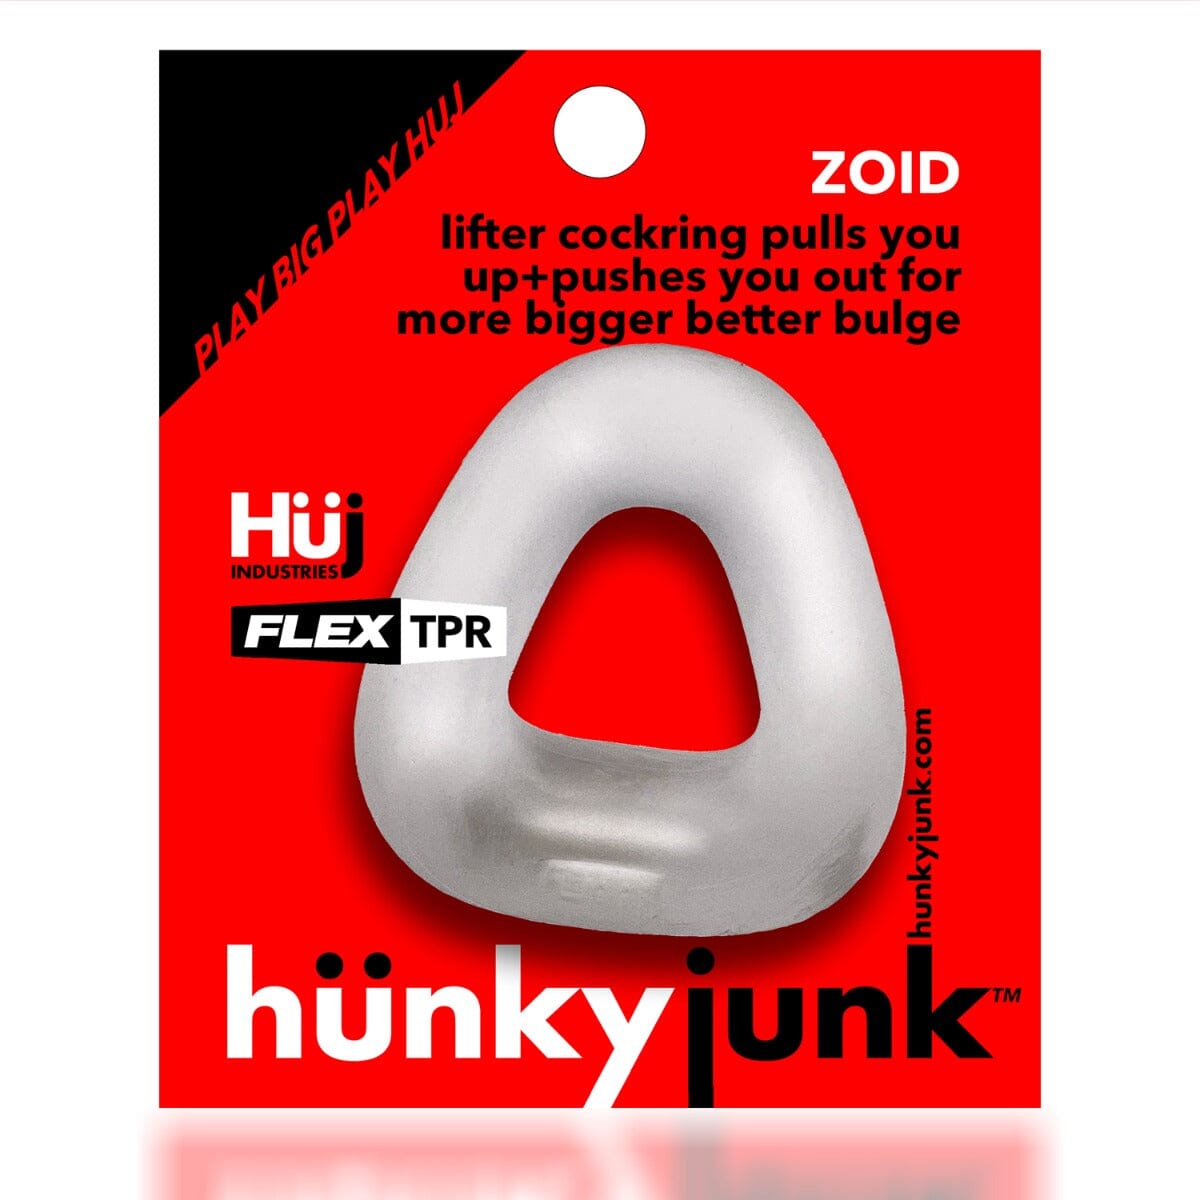 Hunkyjunk Zoid Trapaziod Lifter Cockring